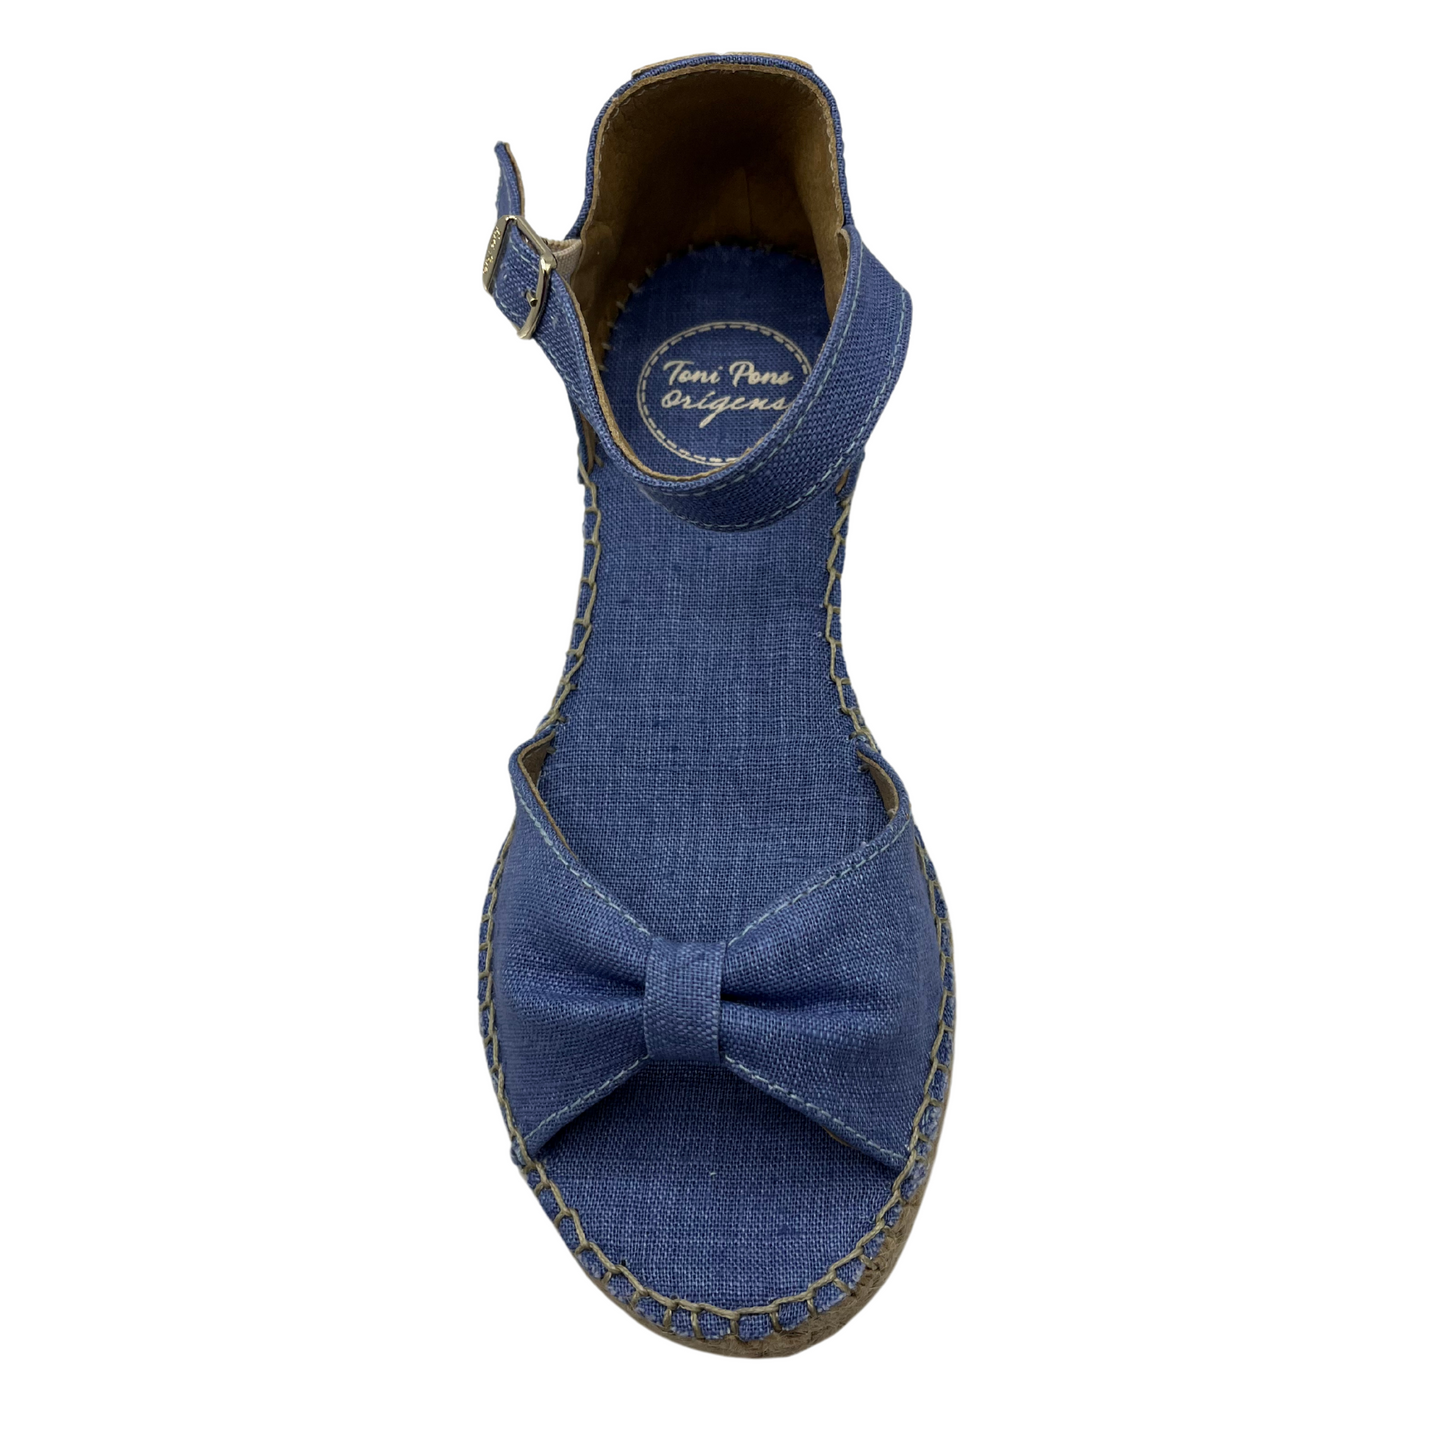 Top view of blue low wedge sandal with bow strap on toe and buckle ankle strap